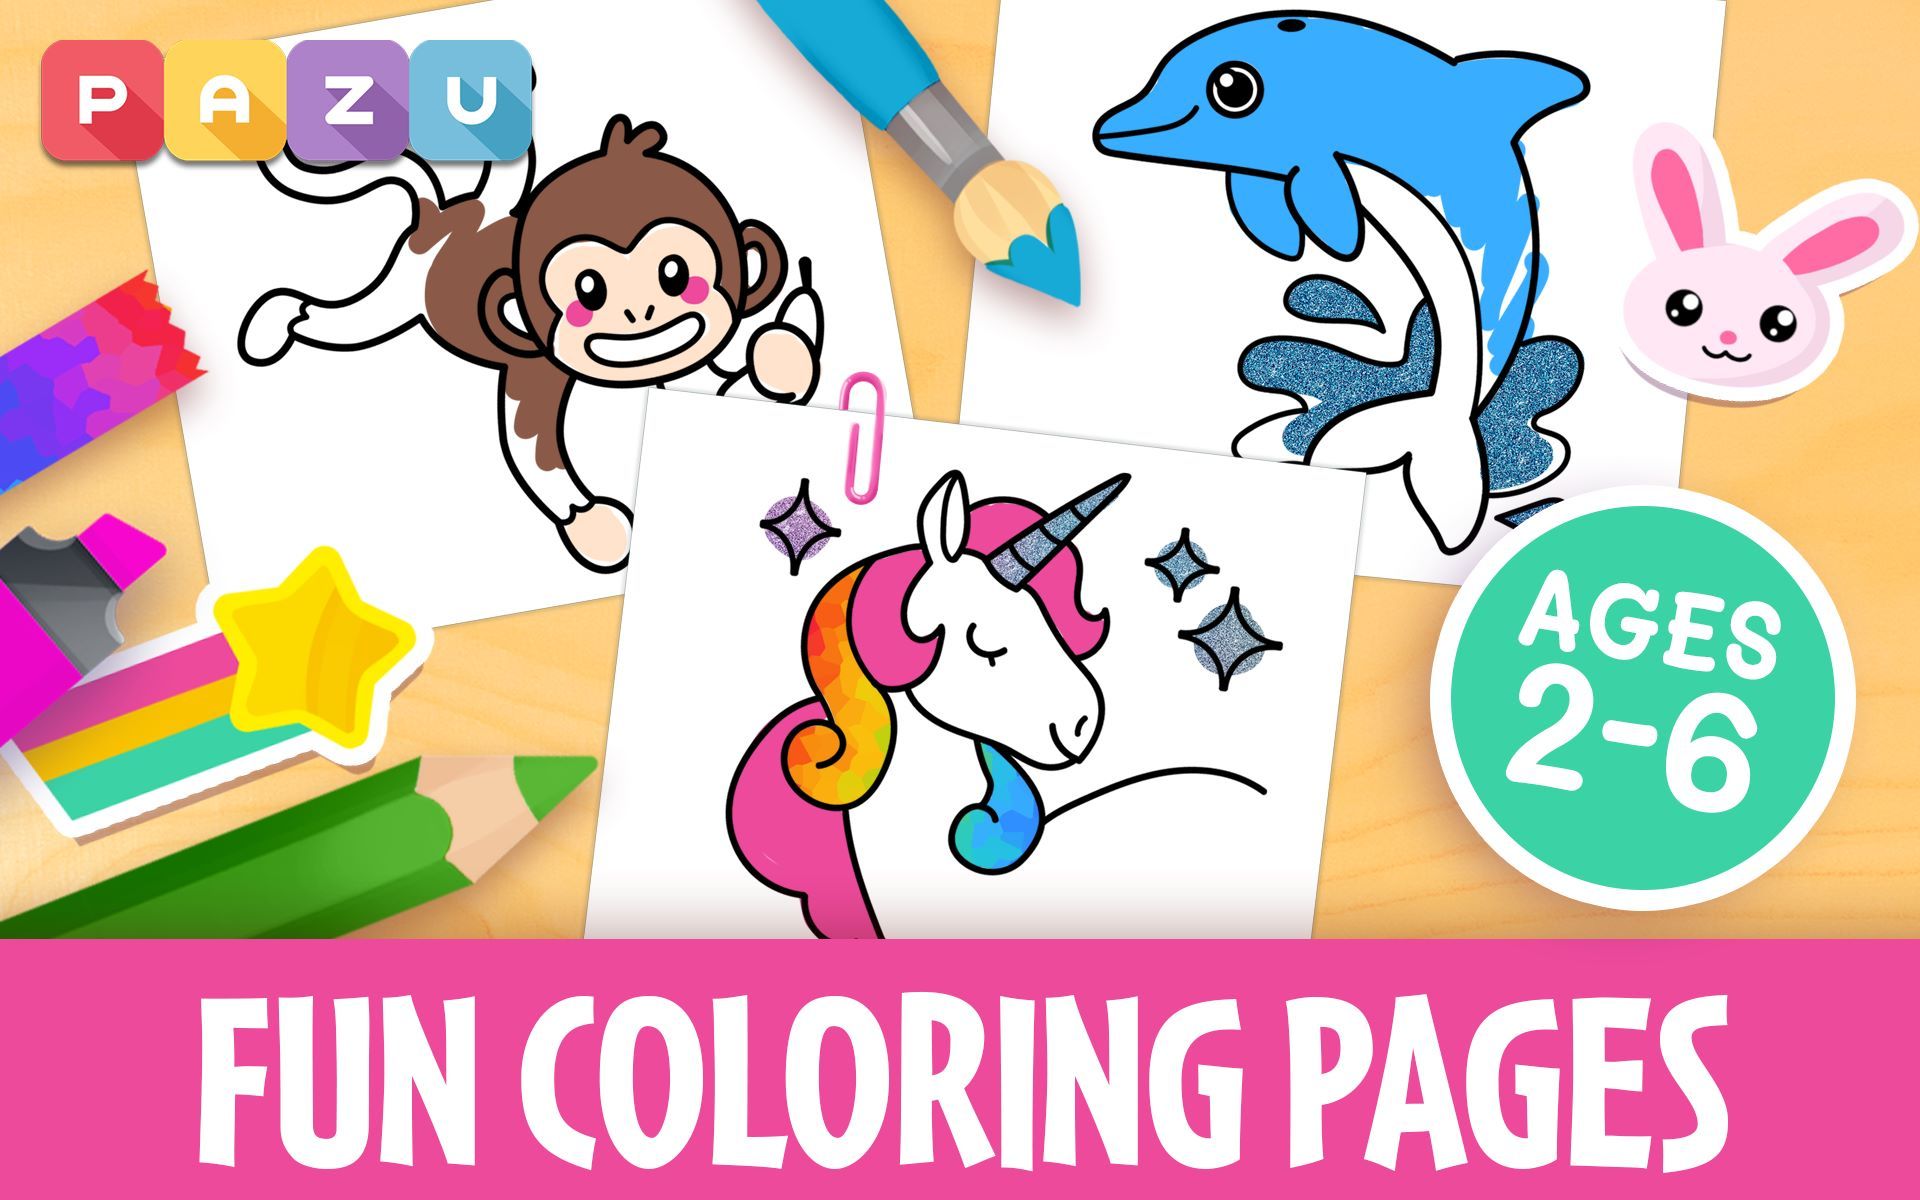 Coloring games for kids - Painting for toddlers